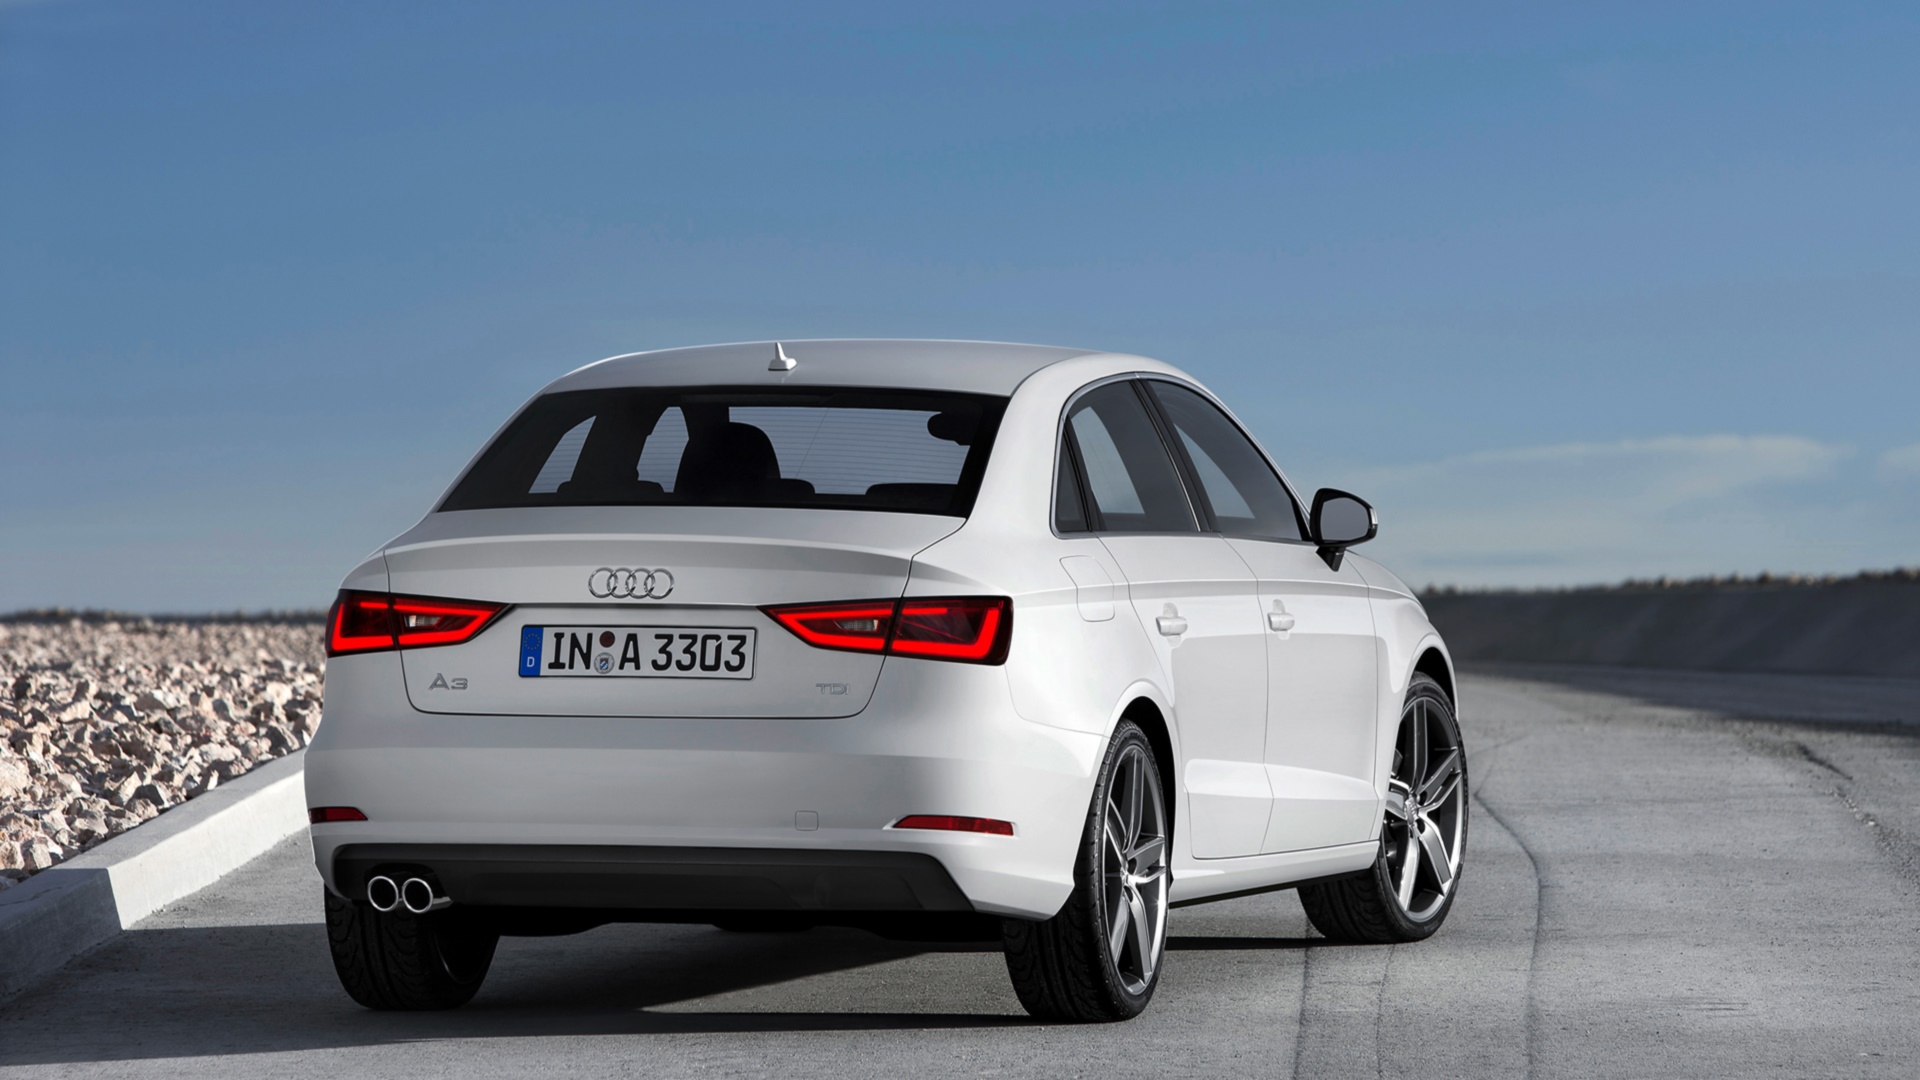 Audi A3 Wallpaper Pictures Image